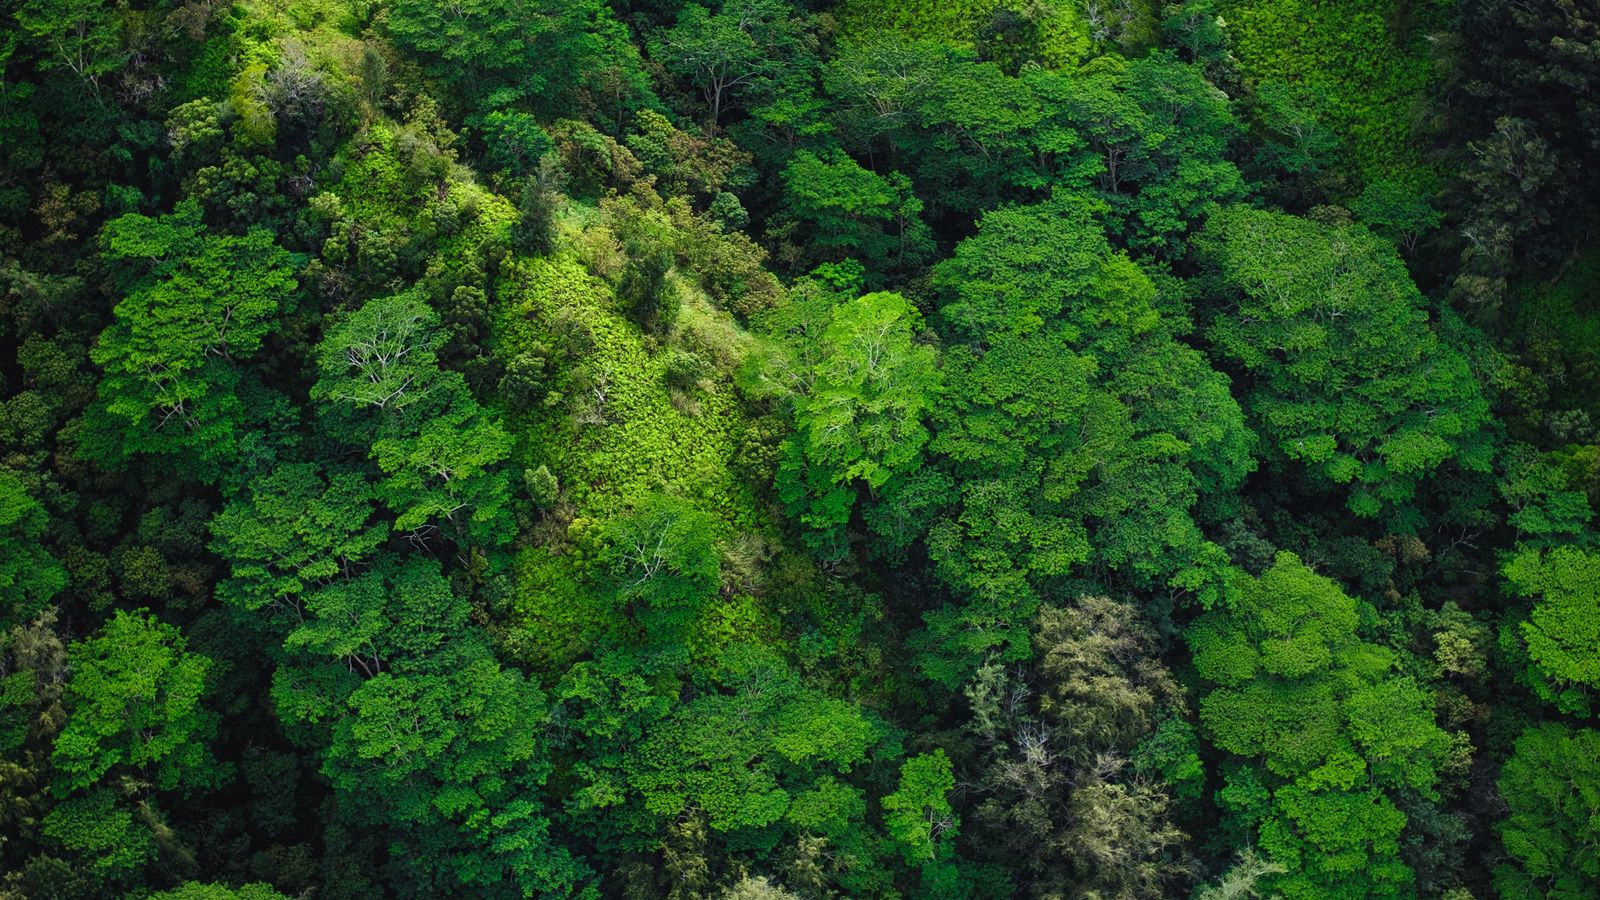 Download wallpaper 1600x900 trees, top view, green, forest widescreen 16:9 HD background